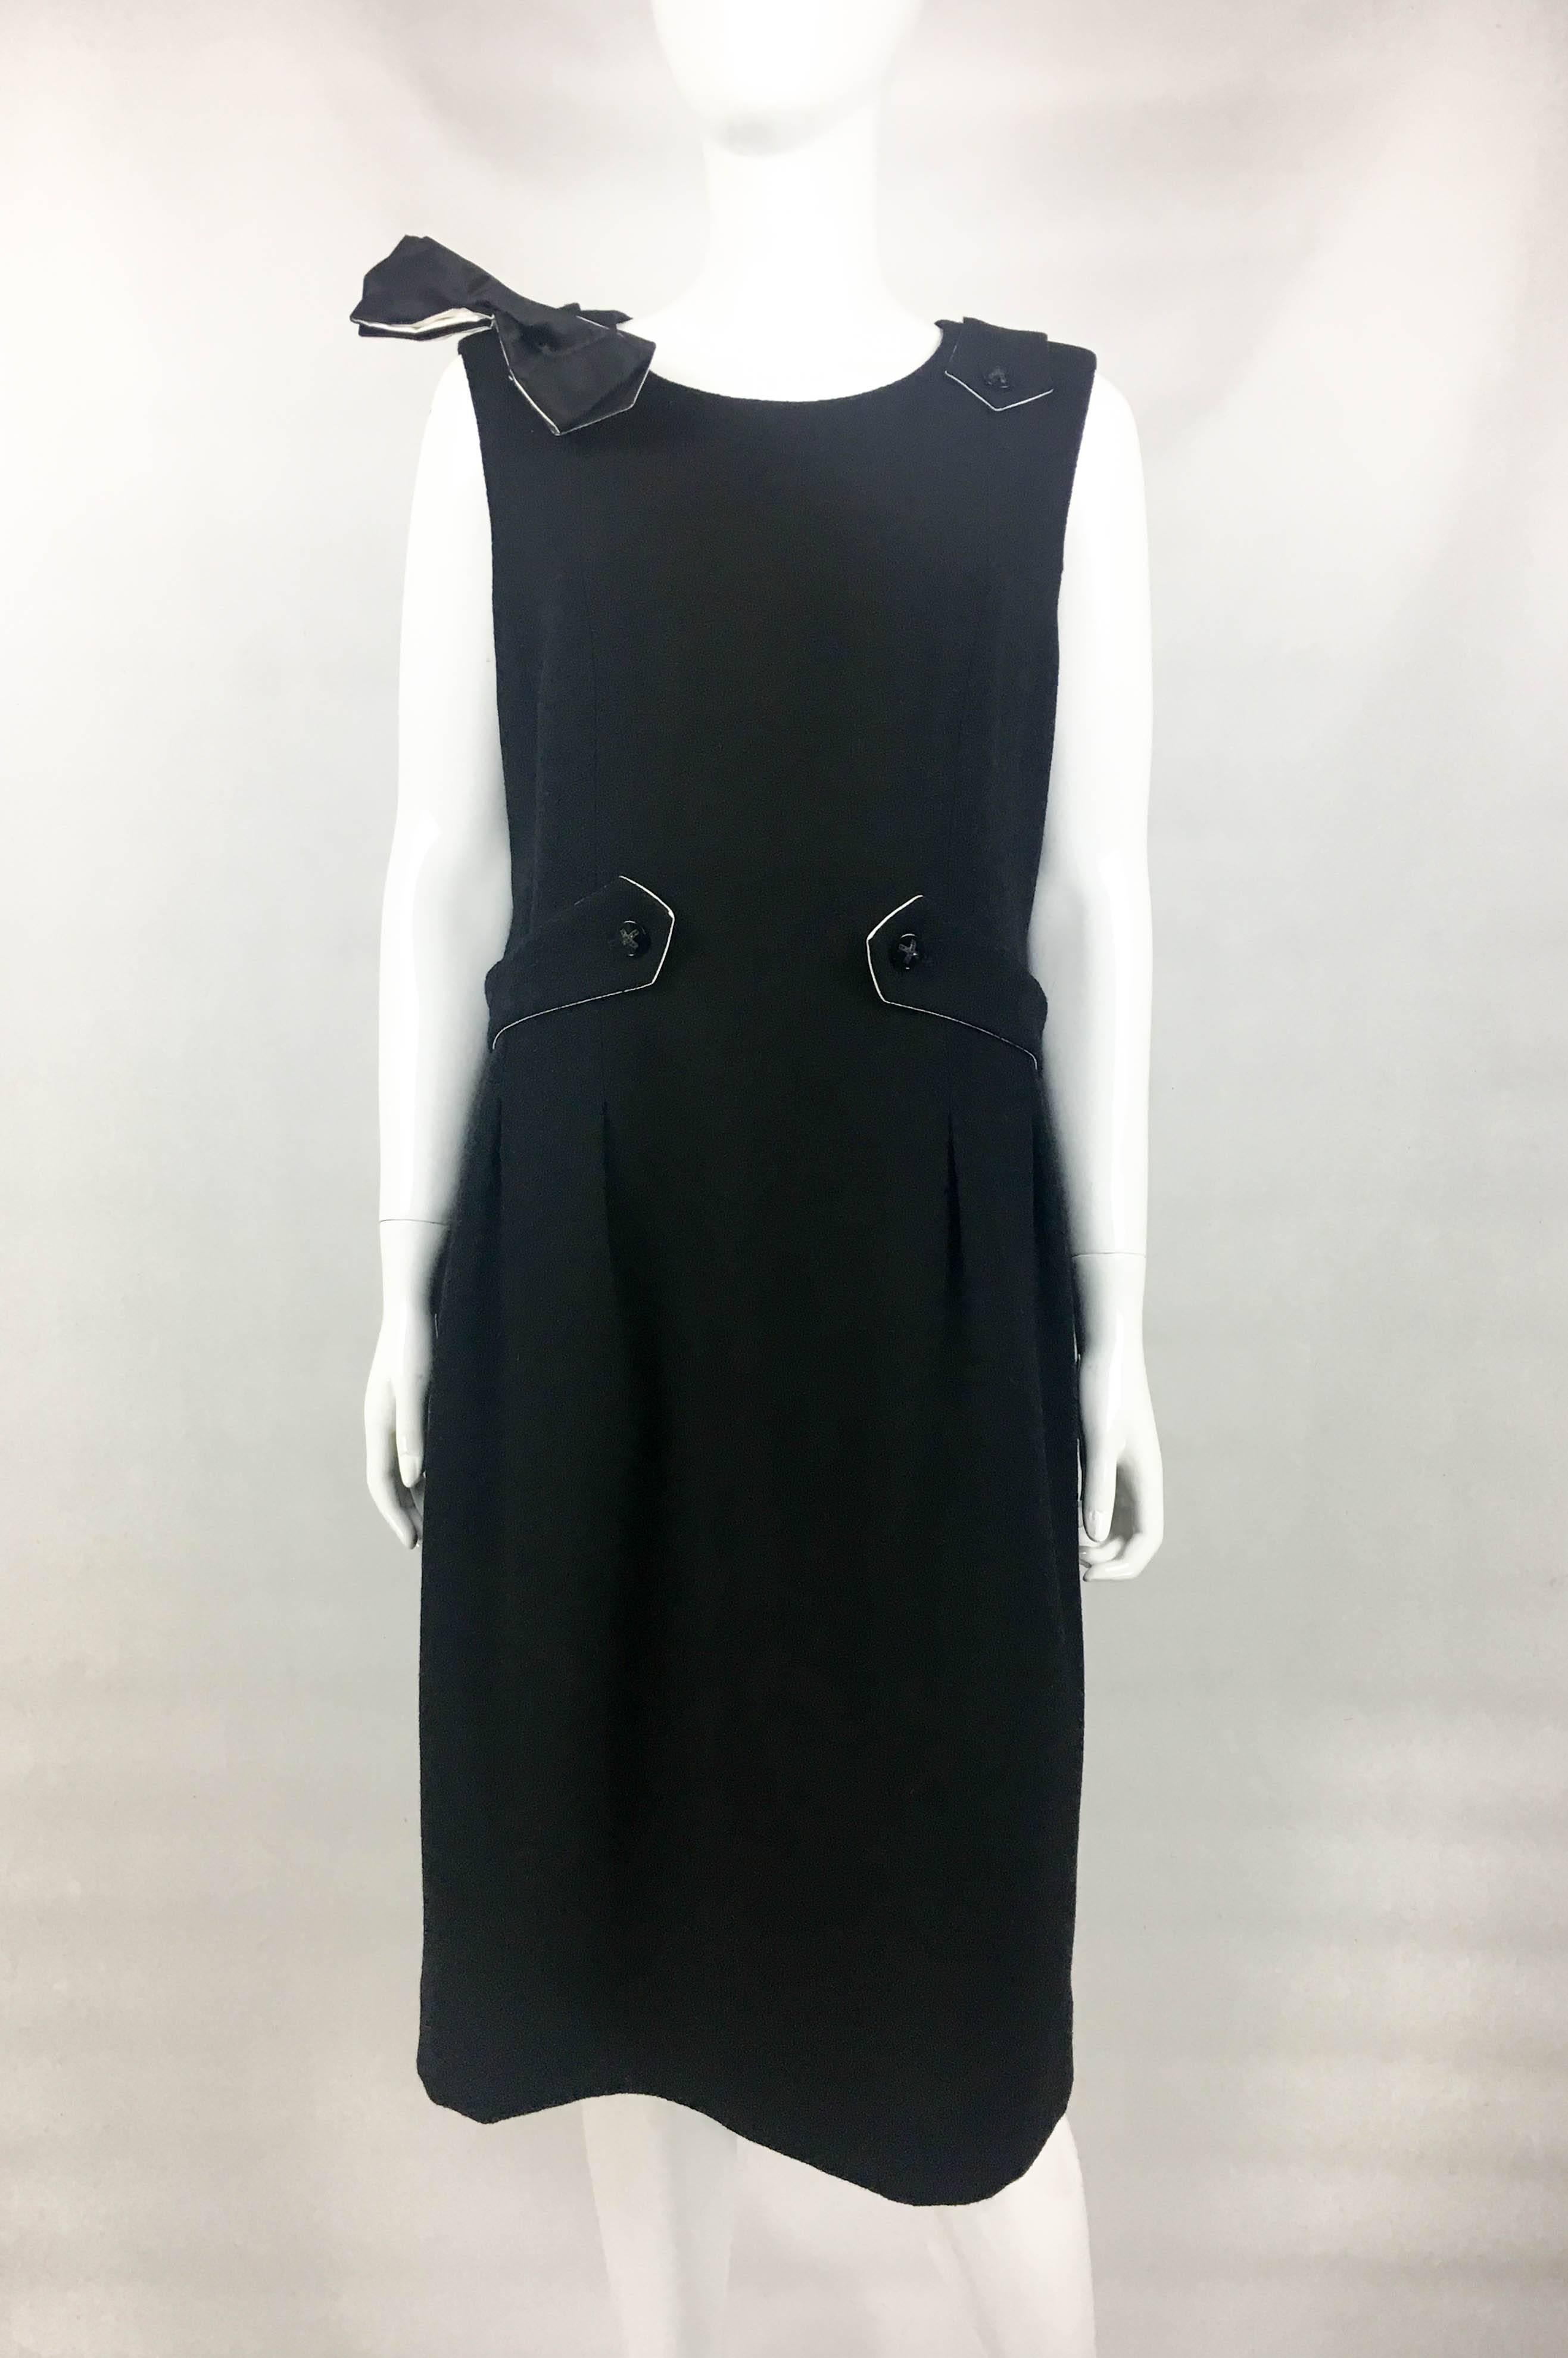 Women's Chanel Runway Look Black Dress With Buttoned Details and Bow, 2006  For Sale